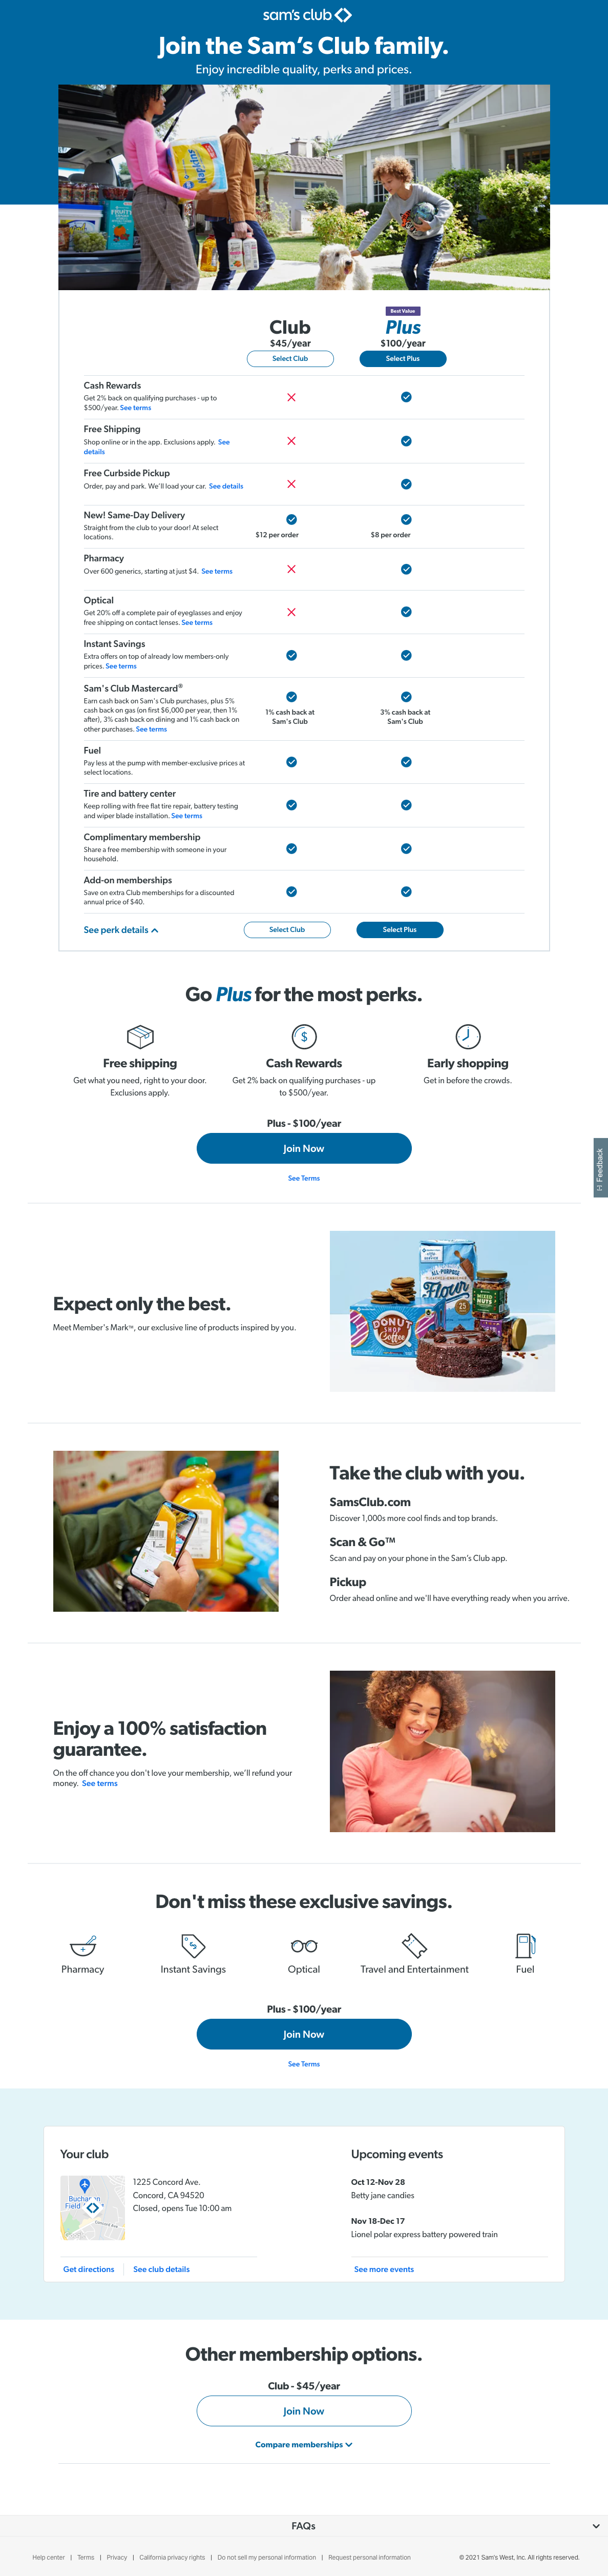 Sam's Club membership join landing page after FY21 redesign, with expanded details about membership perks